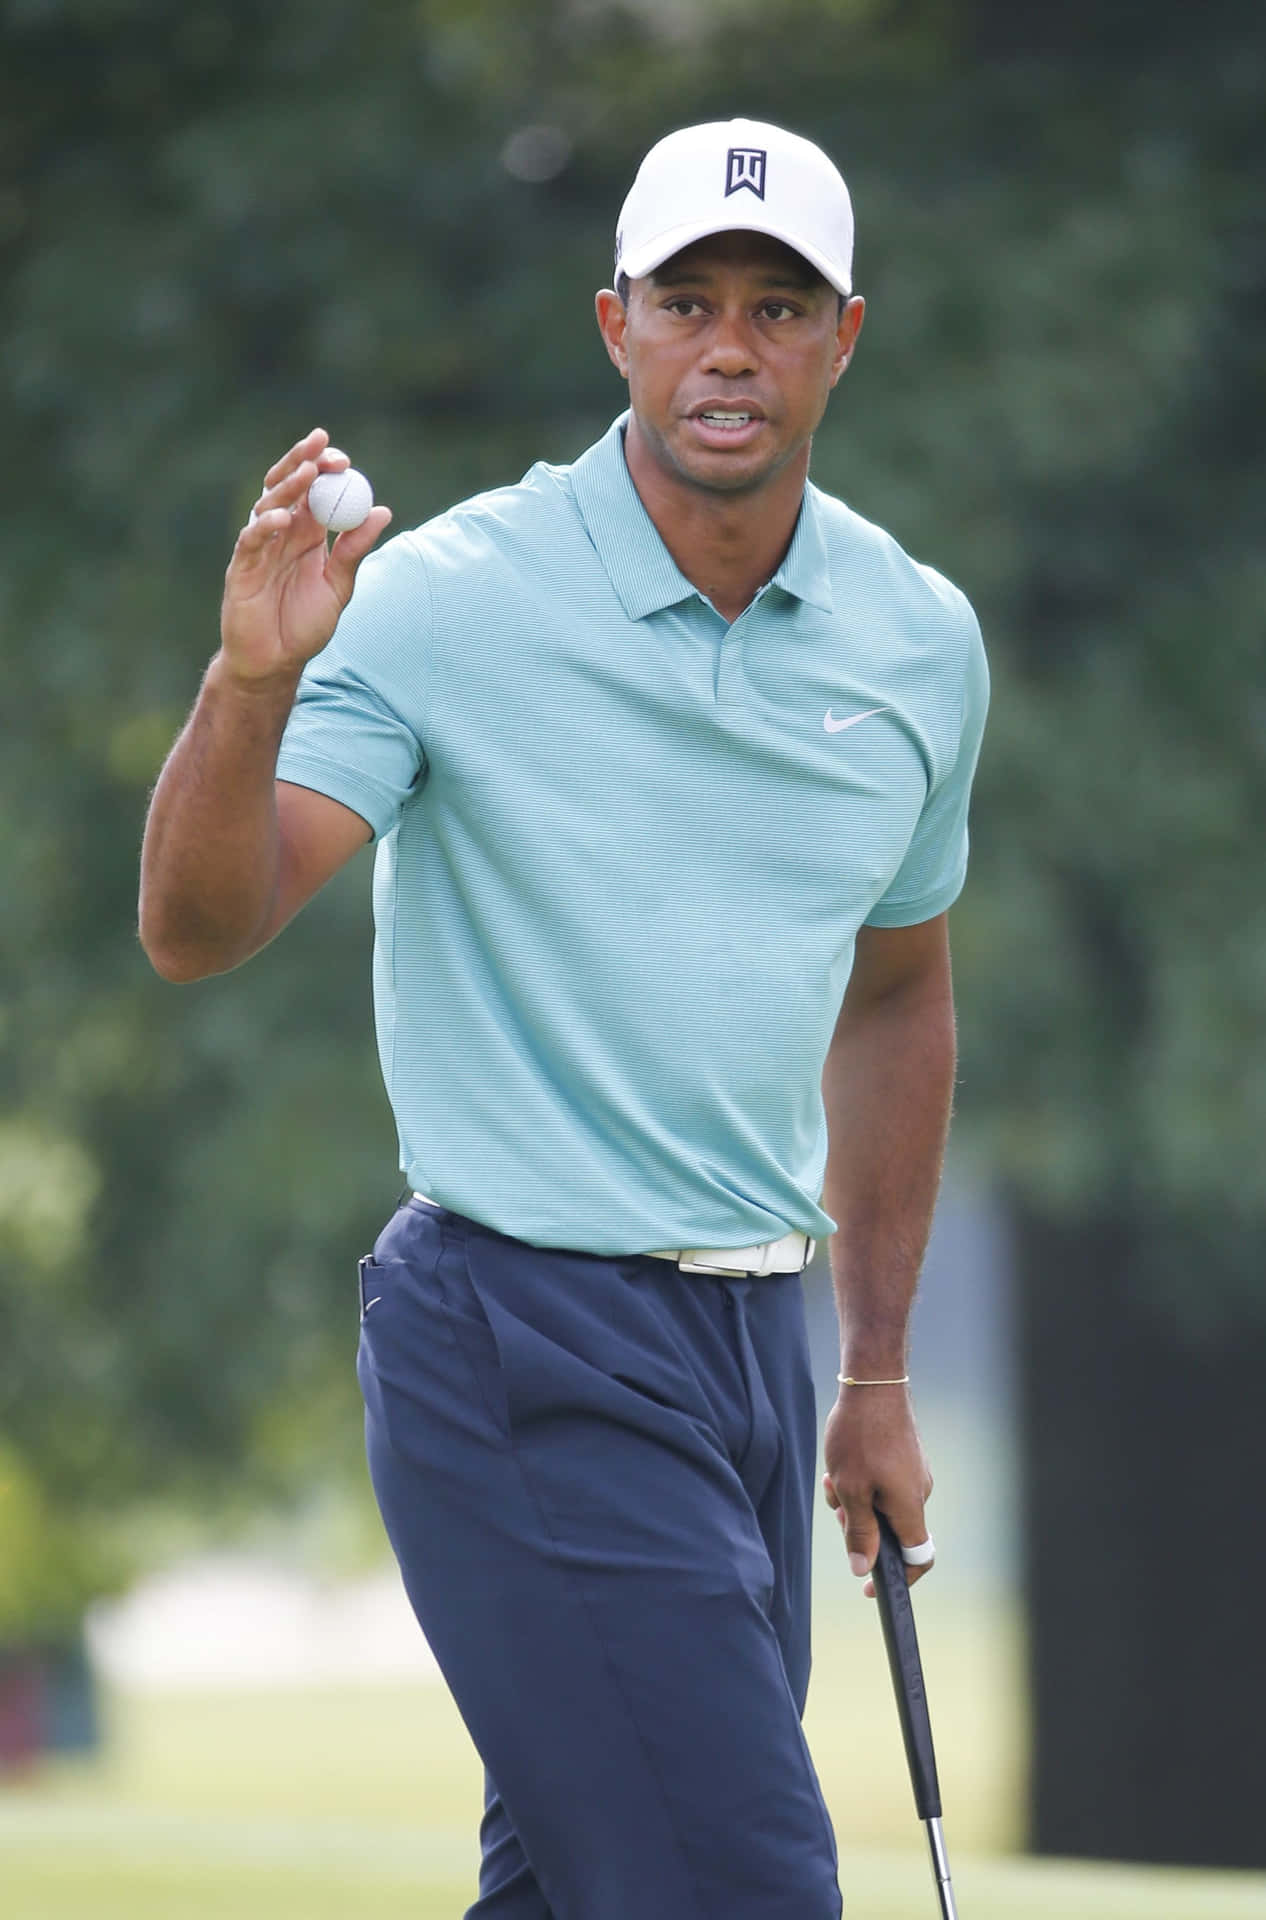 The Golf And Tiger Woods Iphone Wallpaper